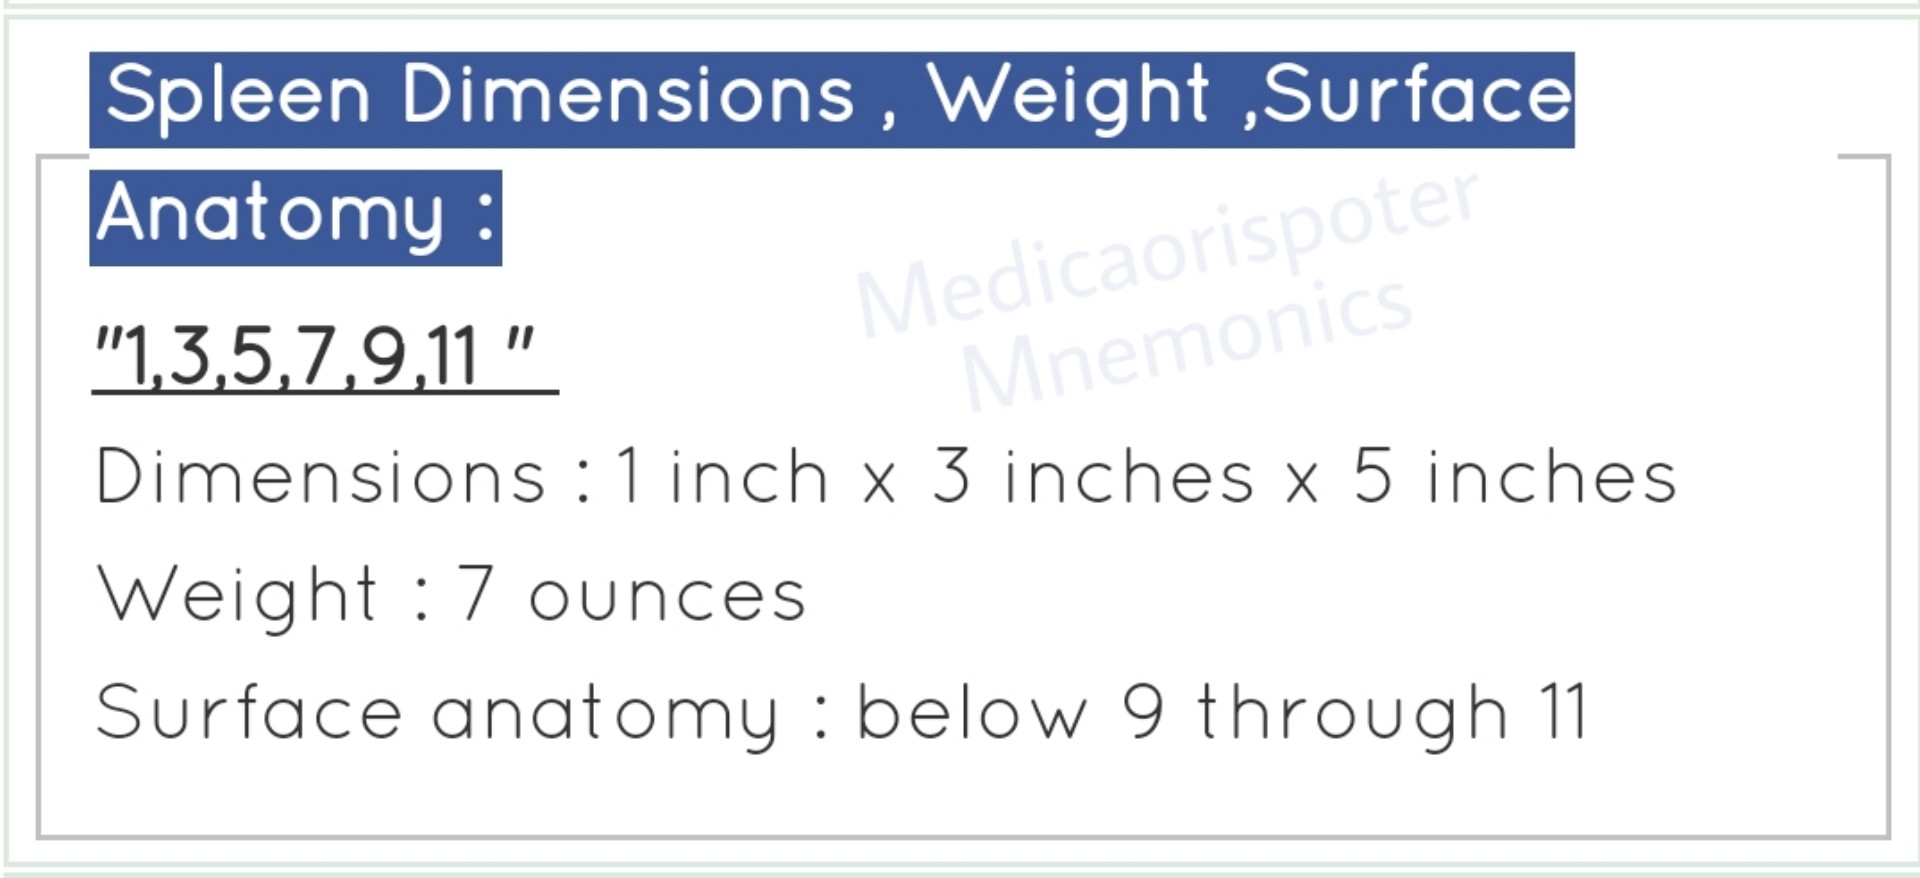 preview of Spleen Dimensions Weight and Surfaces Anatomy.jpg